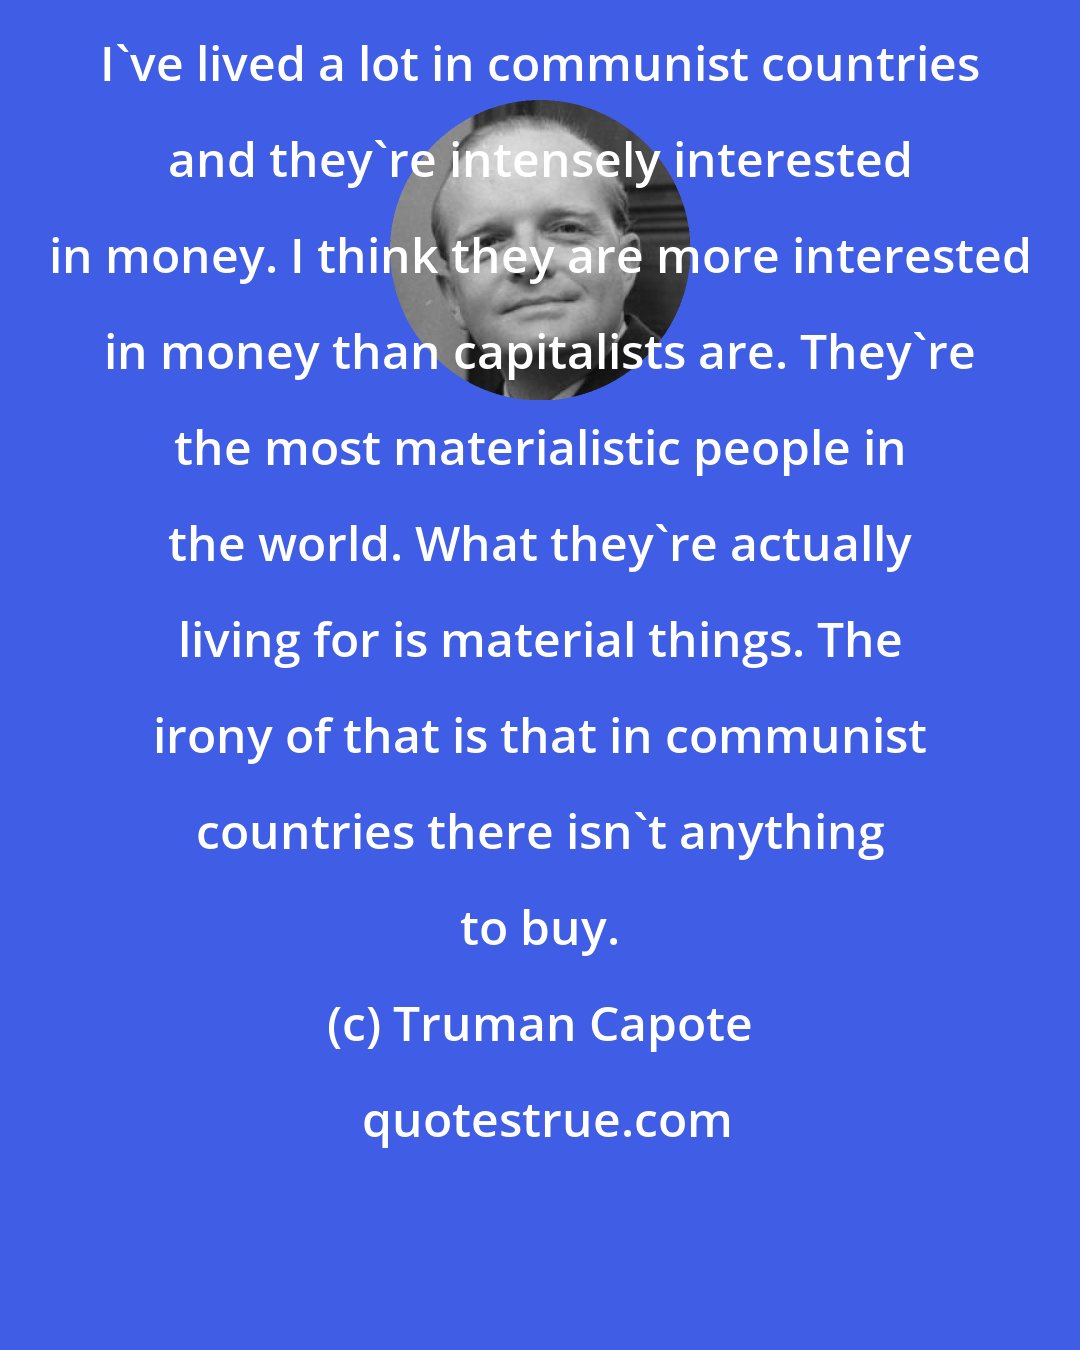 Truman Capote: I've lived a lot in communist countries and they're intensely interested in money. I think they are more interested in money than capitalists are. They're the most materialistic people in the world. What they're actually living for is material things. The irony of that is that in communist countries there isn't anything to buy.